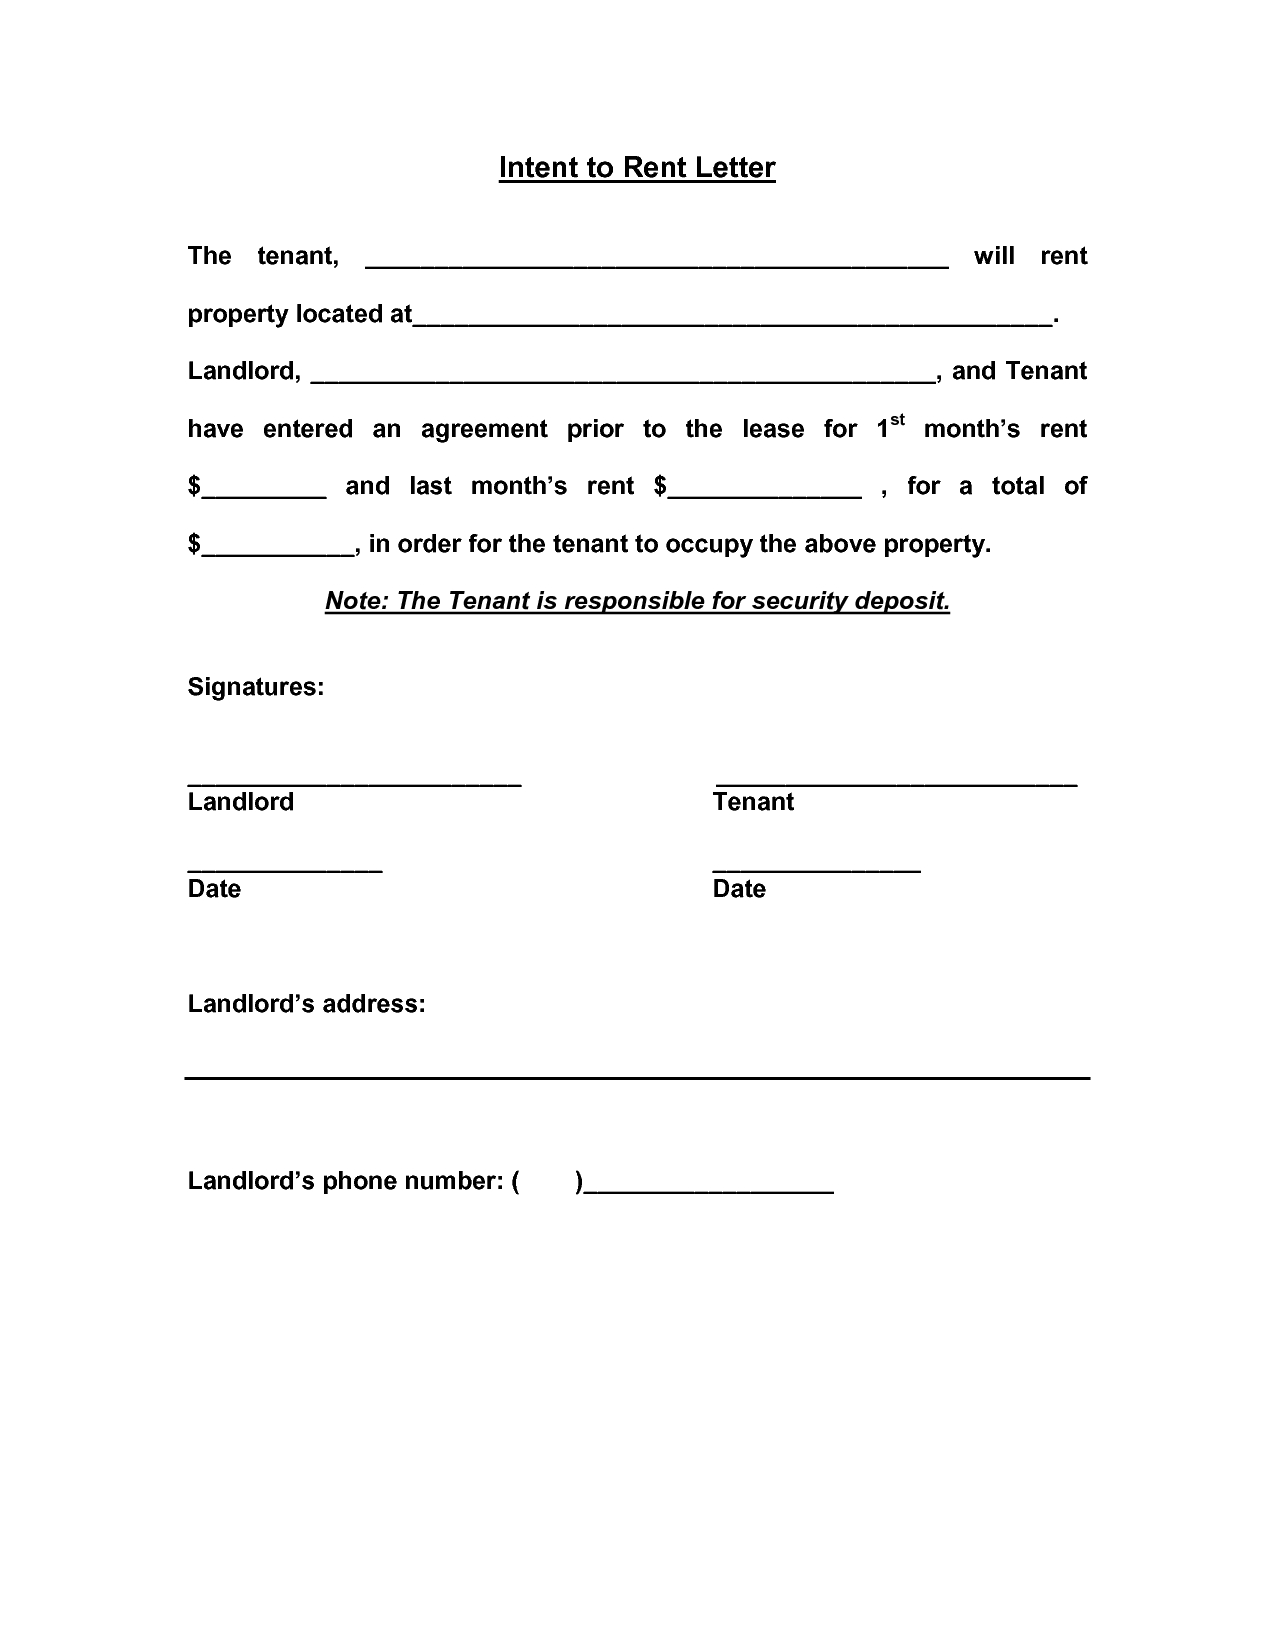 Intent to Lease Letter Template - Letter Intent to Lease Design Residential Sample Google